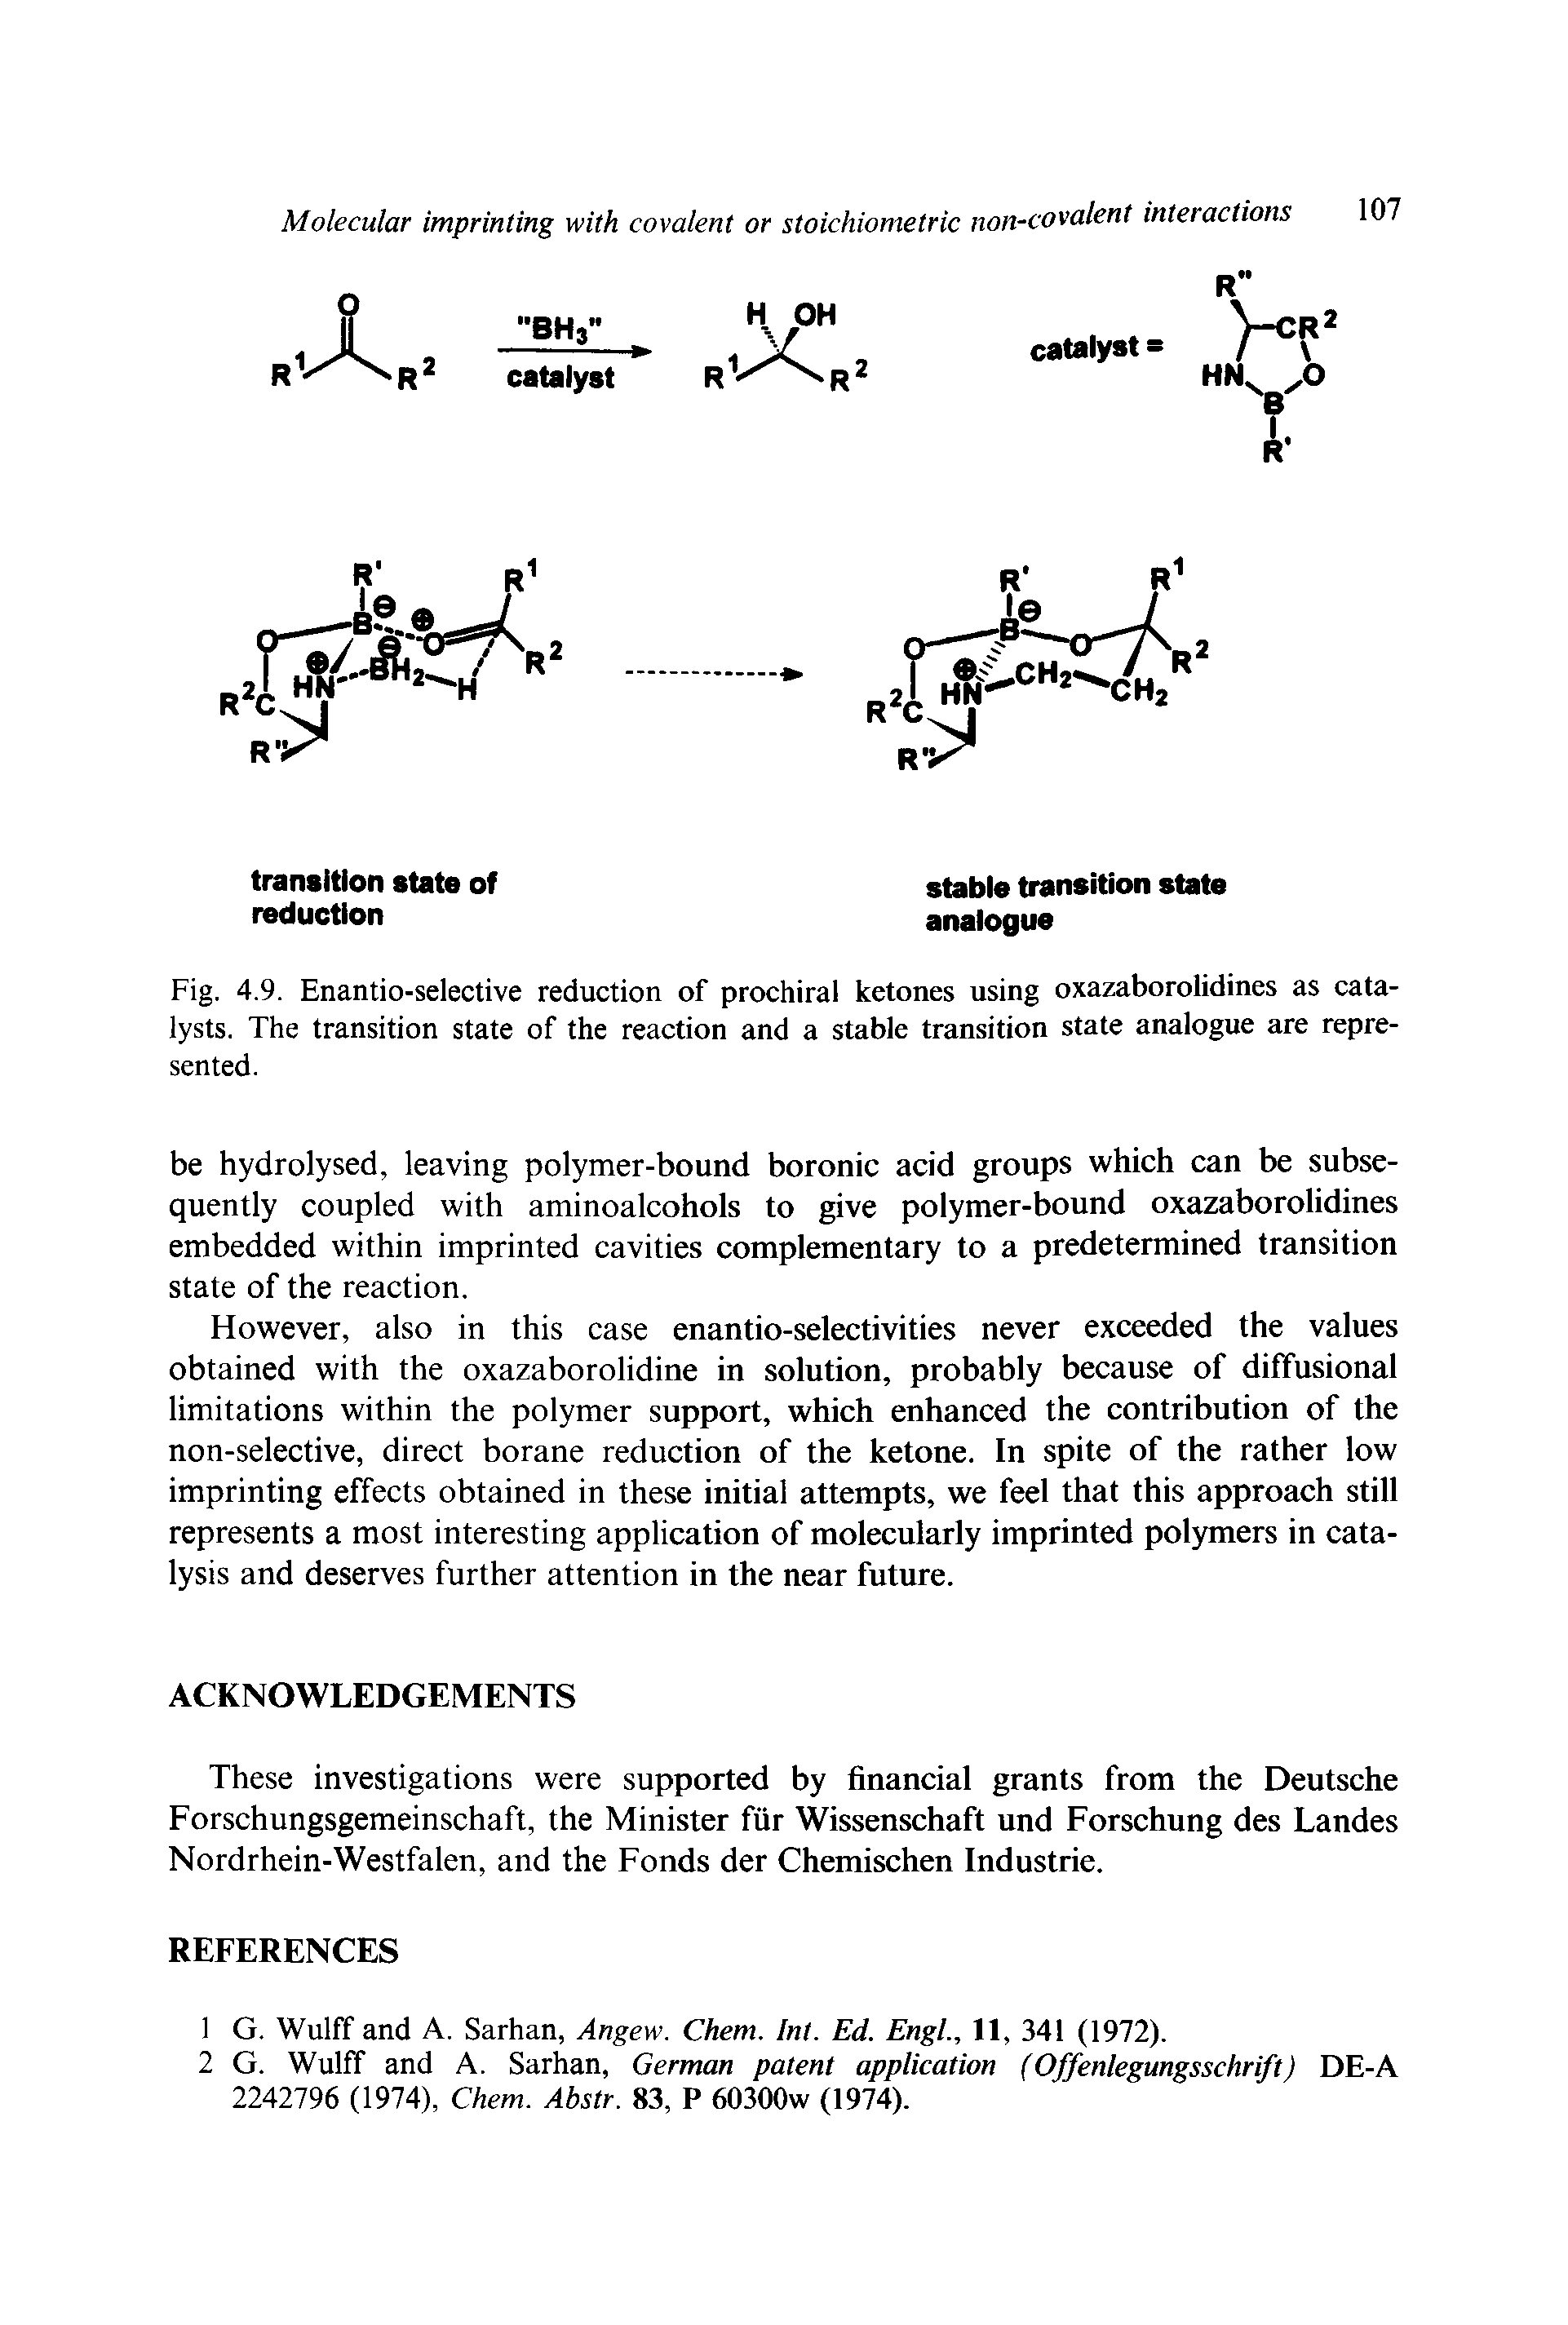 Fig. 4.9. Enantio-selective reduction of prochiral ketones using oxazaborolidines as catalysts. The transition state of the reaction and a stable transition state analogue are represented.